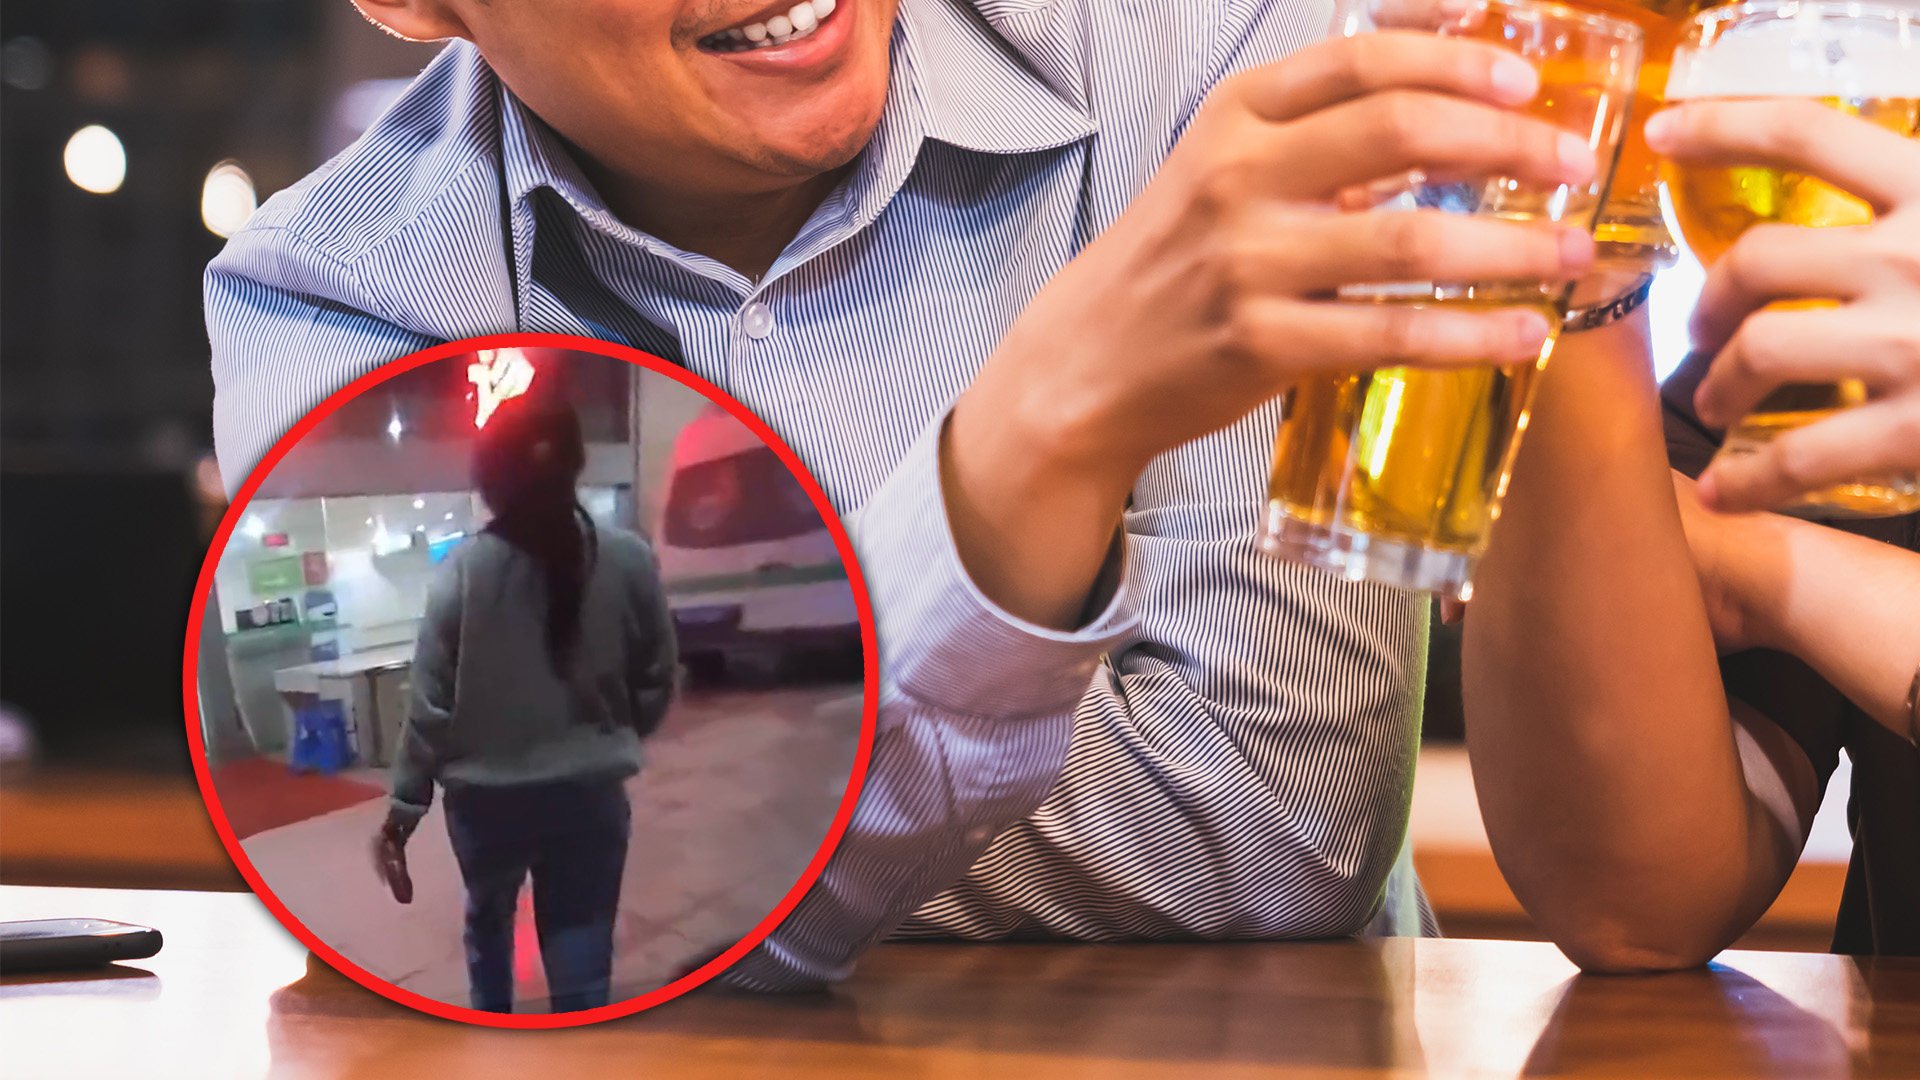 An irresponsible husband in China has been heavily criticised on mainland social media for going out drinking with friends and leaving his pregnant wife at home alone, forcing her to call the police for help when she showed signs of premature birth. Photo: SCMP composite/Shutterstock/Weibo